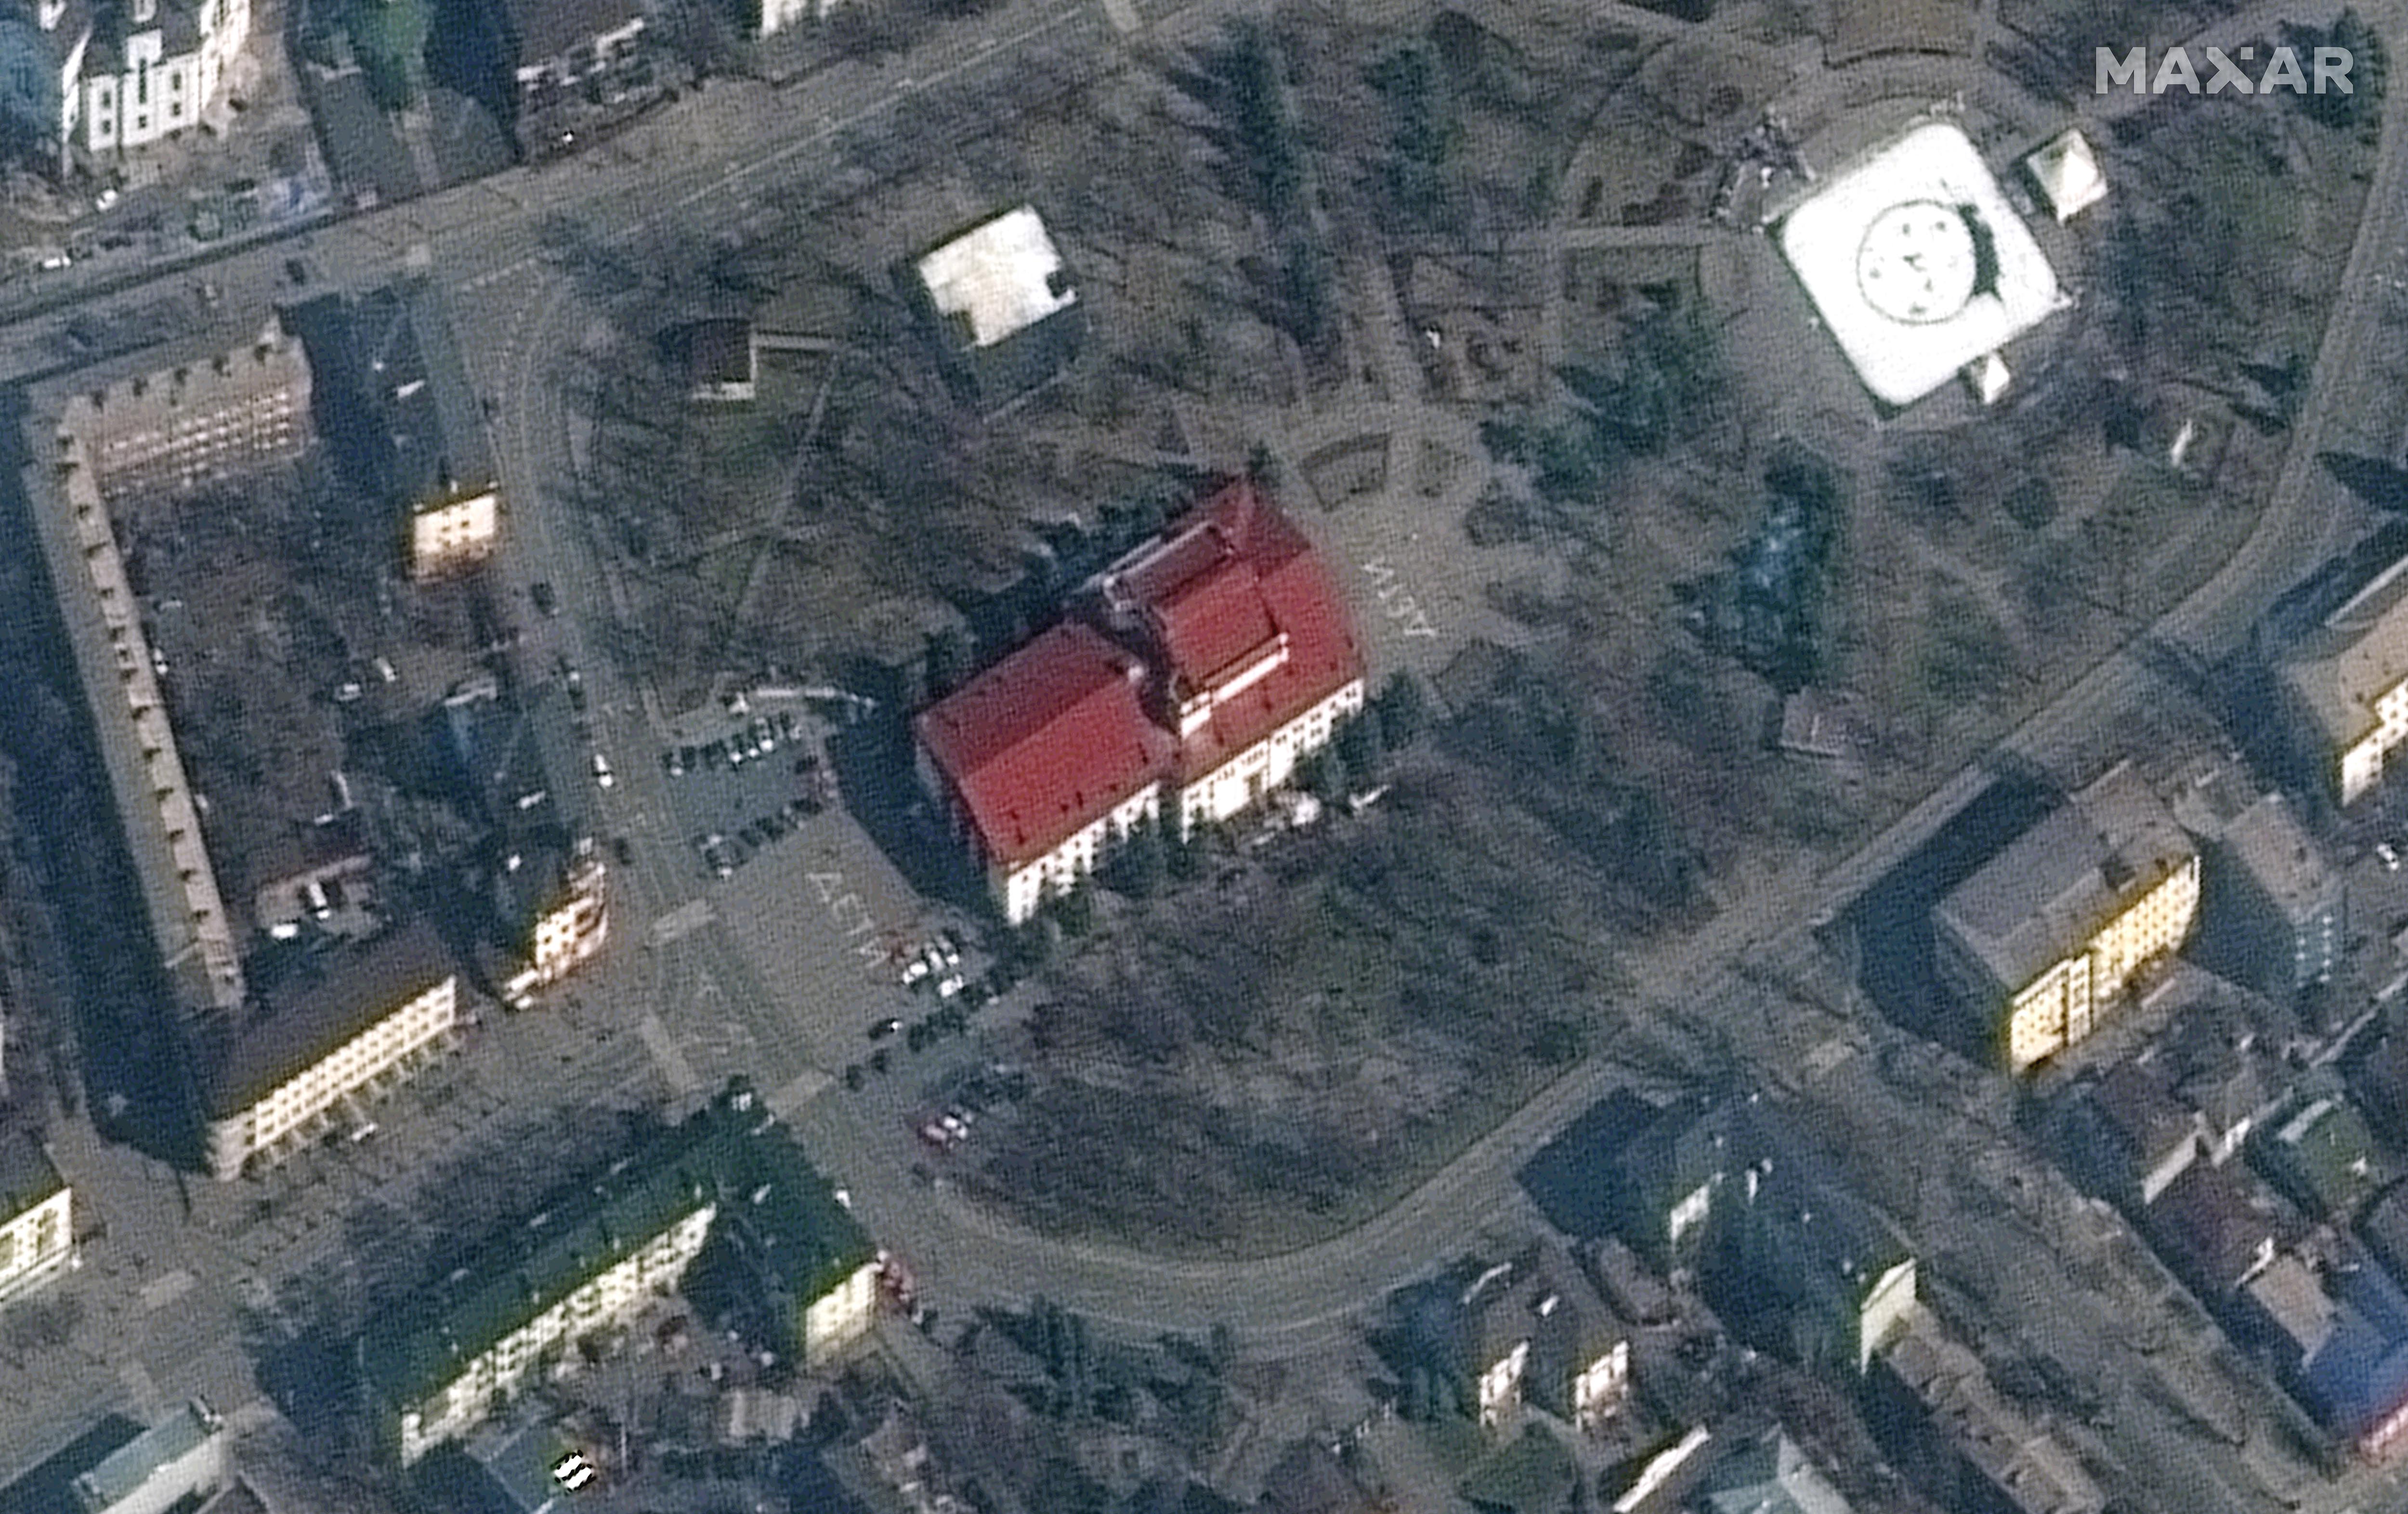 On March 16, 2022 Russia bombed the Mariupol Drama Theater, used as a shelter for  civilians, killing hundreds of people in one of the war’s deadliest attacks. Satellite imagery provided by Maxar showed the Russian word for "children" was written on the ground in front of and behind the theater.